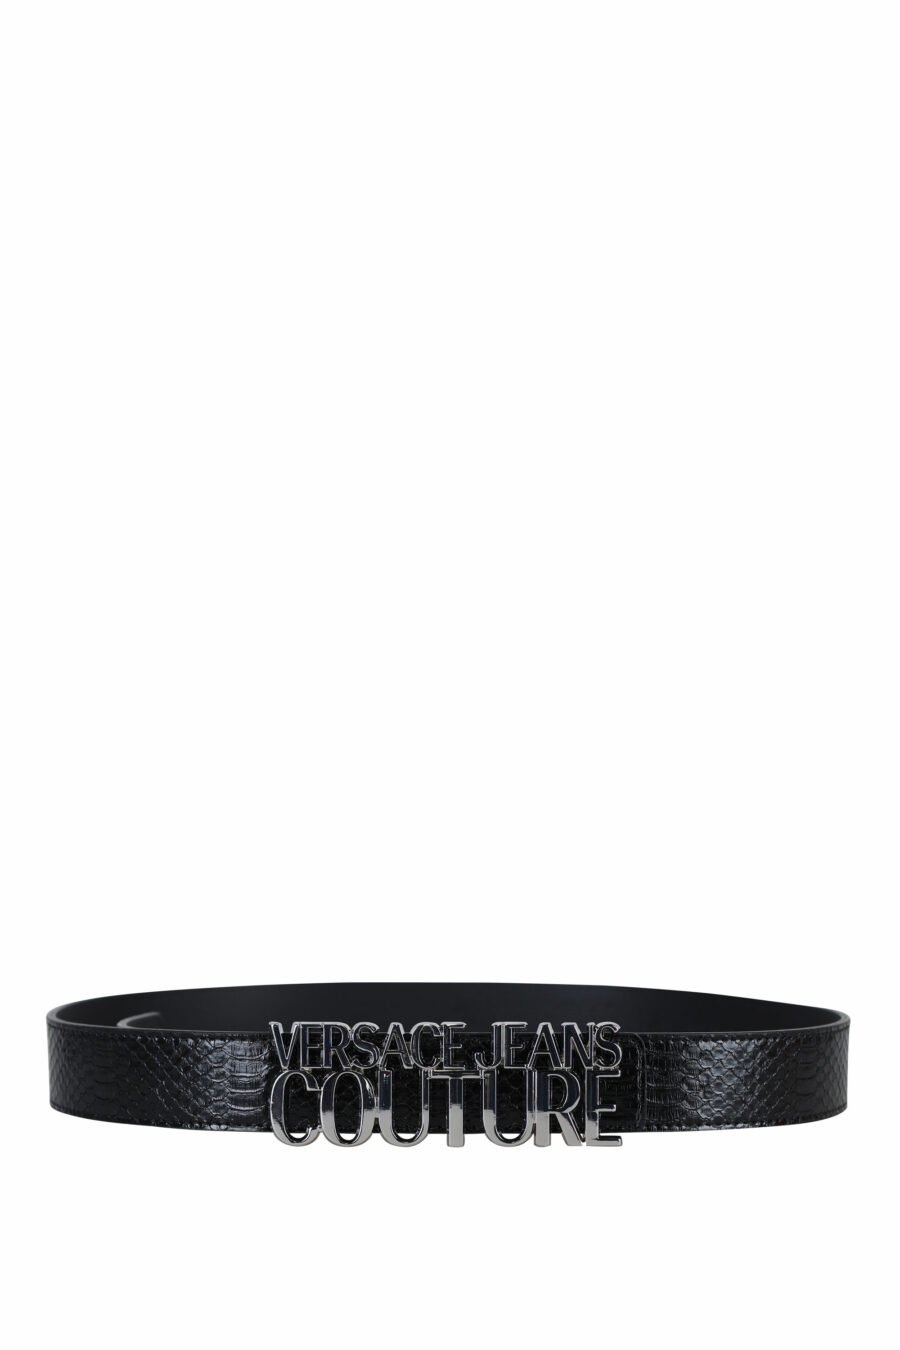 Black belt with snake texture and silver lettering logo - 8052019479959